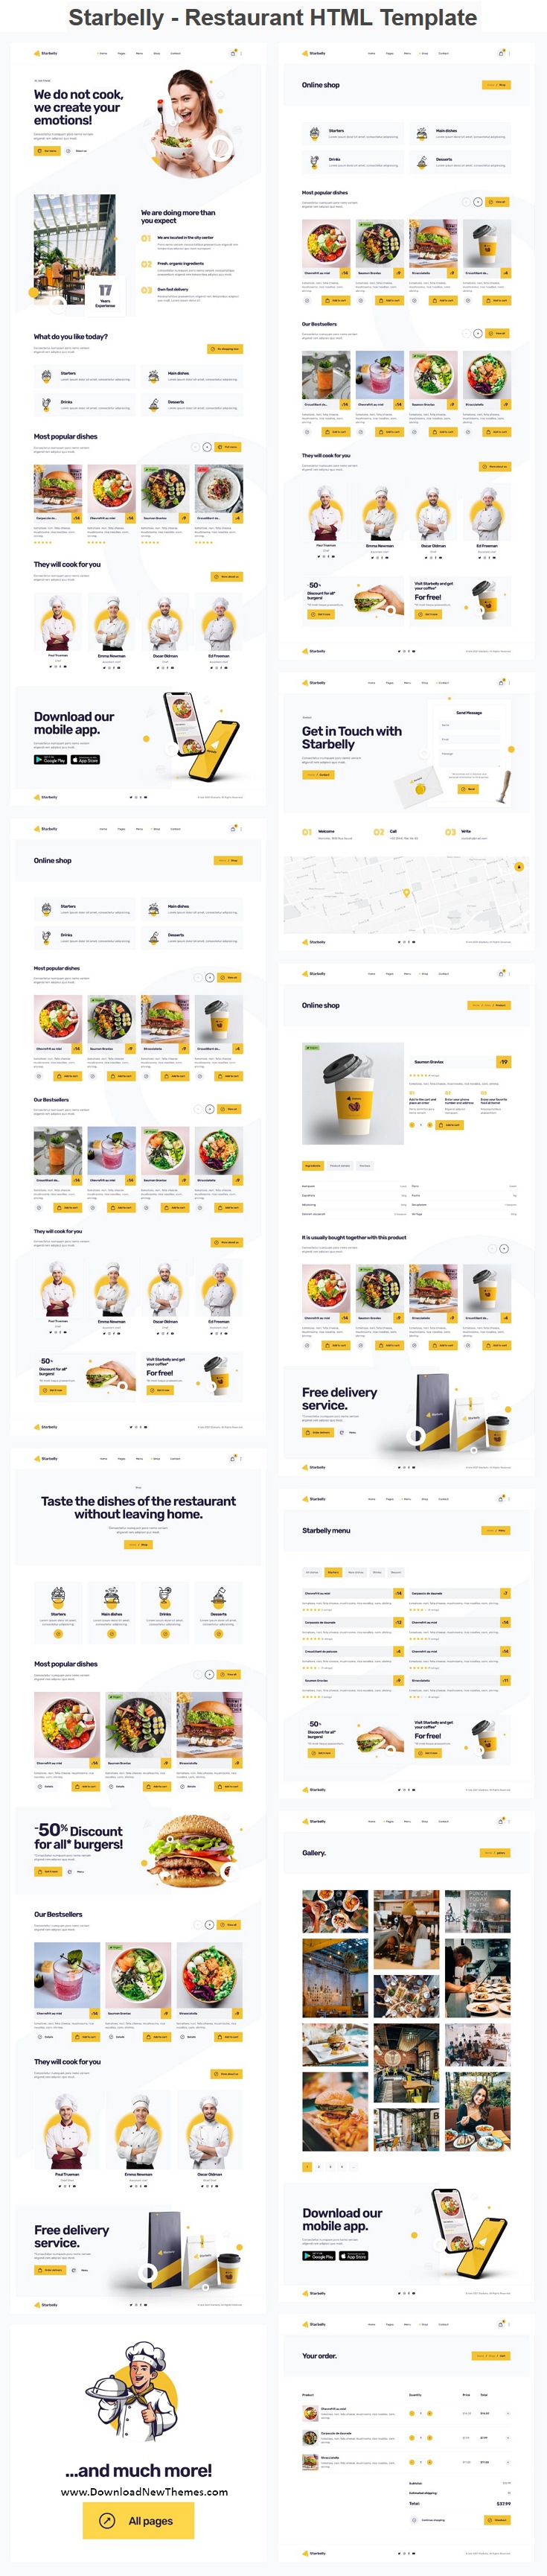 Starbelly - Restaurant HTML Template Review